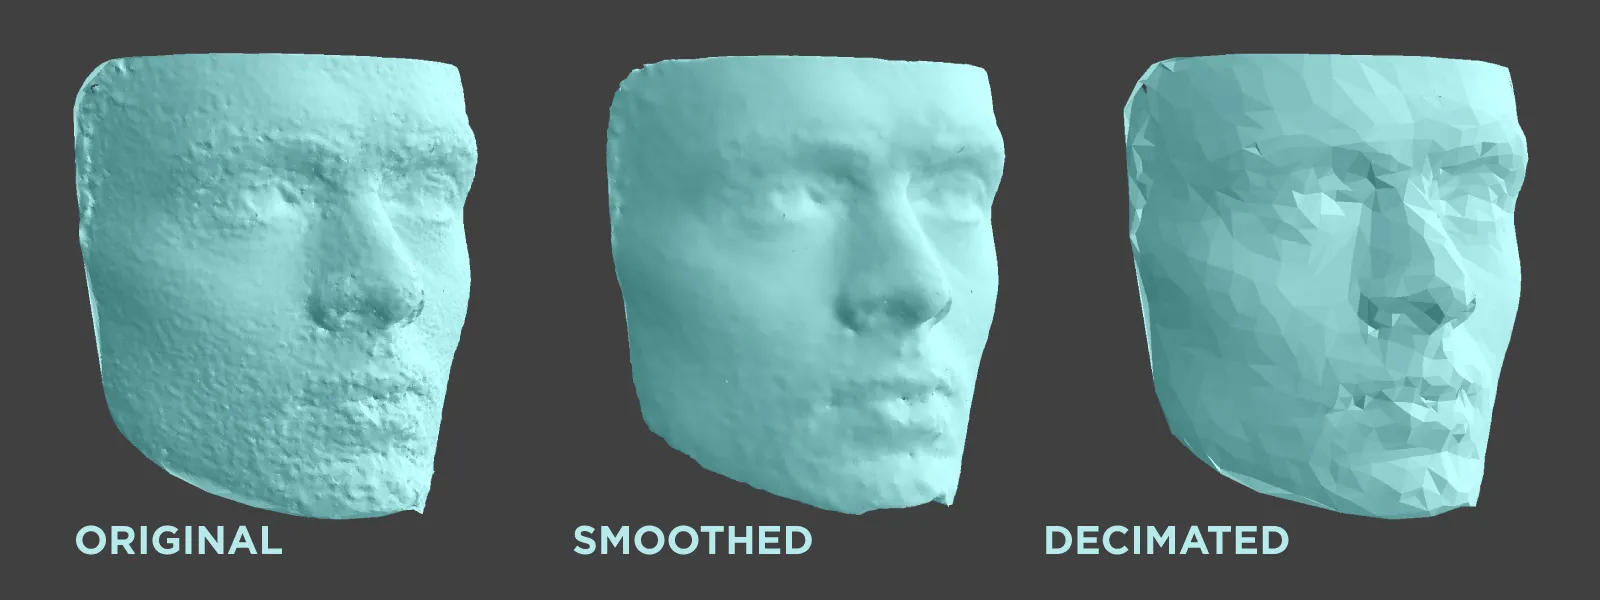 Snanning-Human-Face-3D-Mesh-Smoothing-Decimation